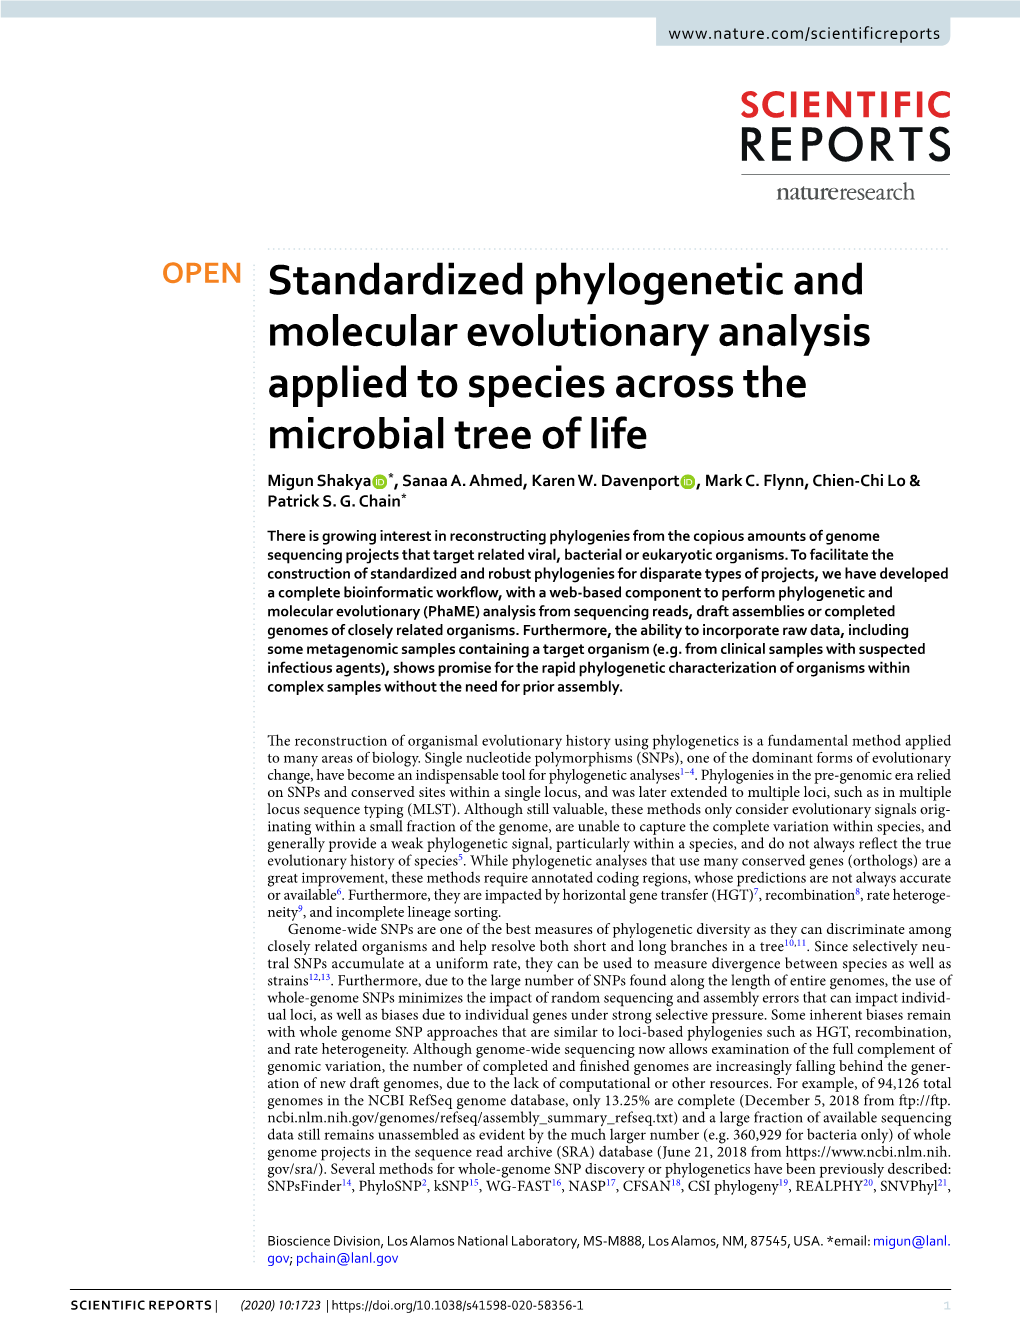 Standardized Phylogenetic and Molecular Evolutionary Analysis Applied to Species Across the Microbial Tree of Life Migun Shakya *, Sanaa A